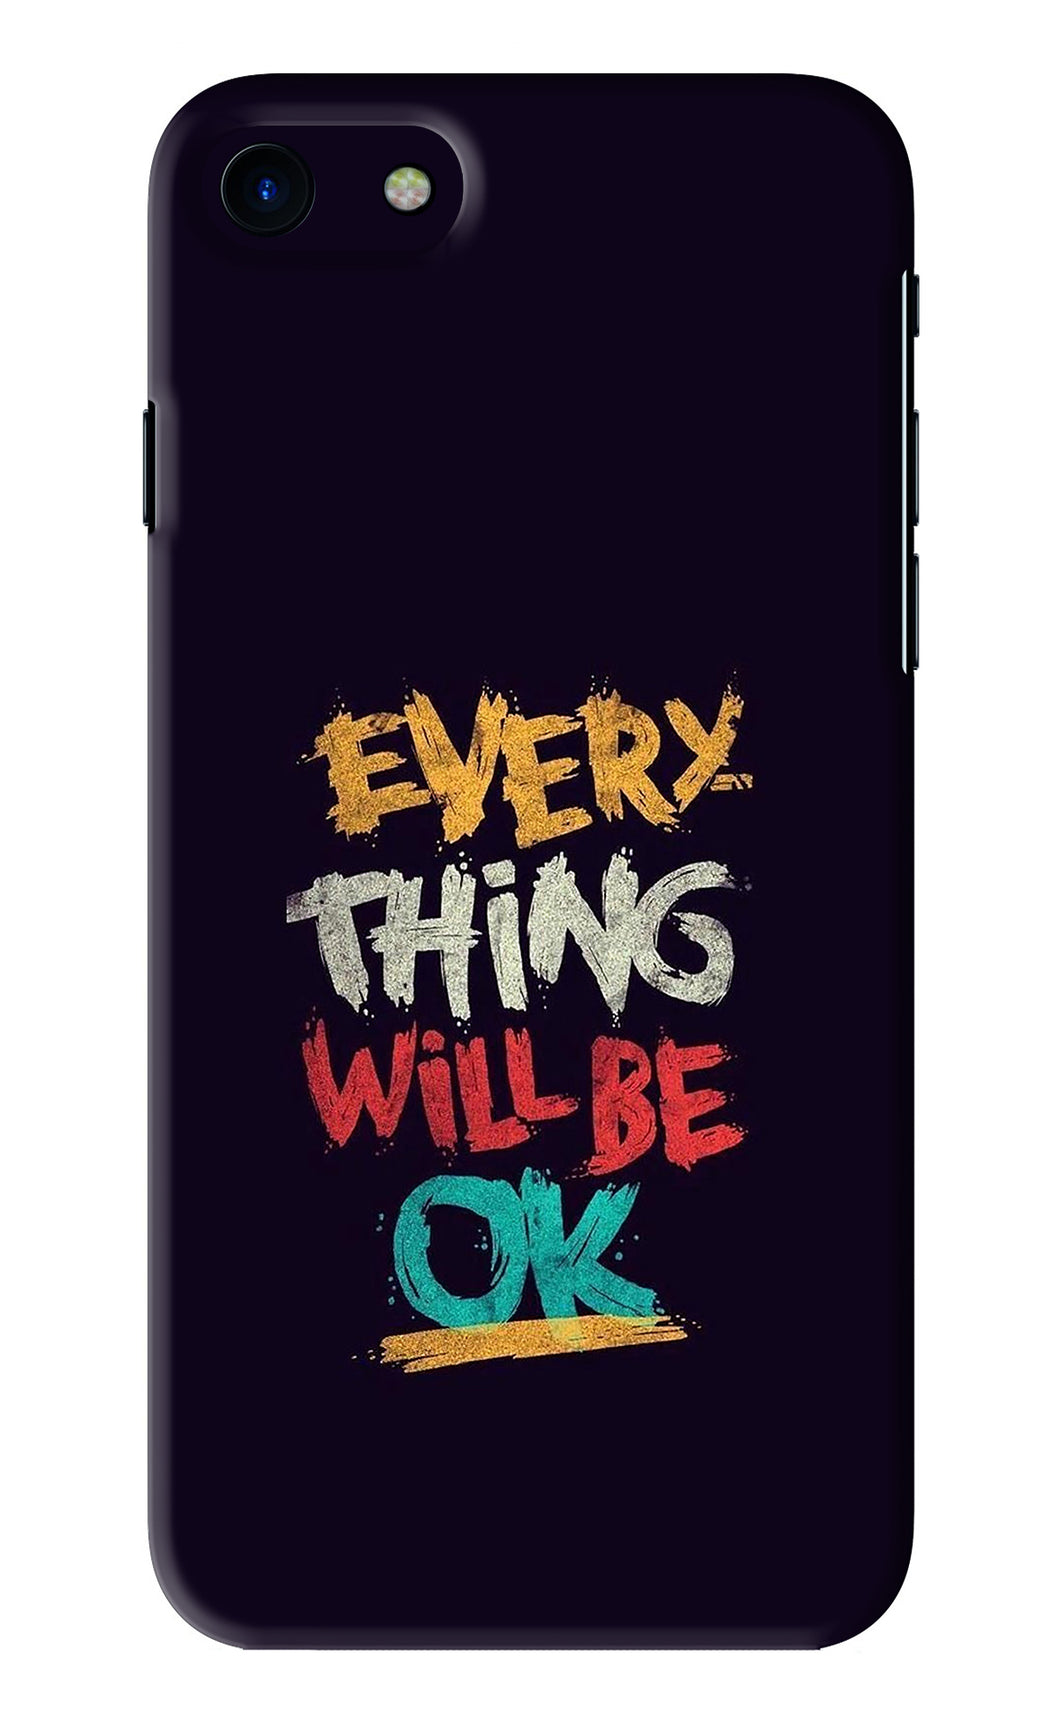 Everything Will Be Ok iPhone SE 2020 Back Skin Wrap